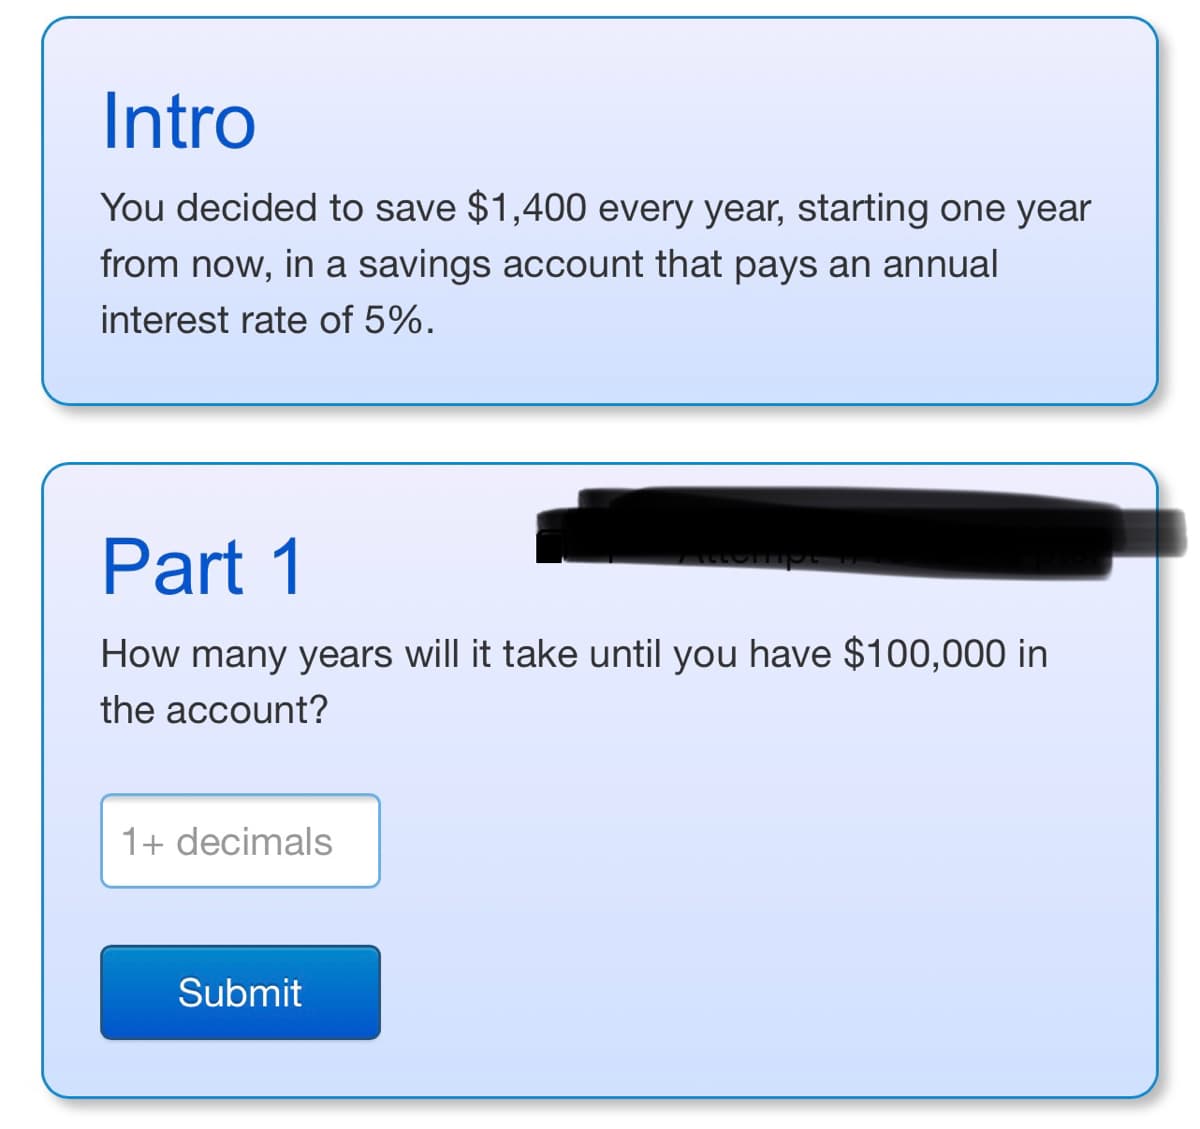 Intro
You decided to save $1,400 every year, starting one year
from now, in a savings account that pays an annual
interest rate of 5%.
Part 1
74440
How many years will it take until you have $100,000 in
the account?
1+ decimals
Submit